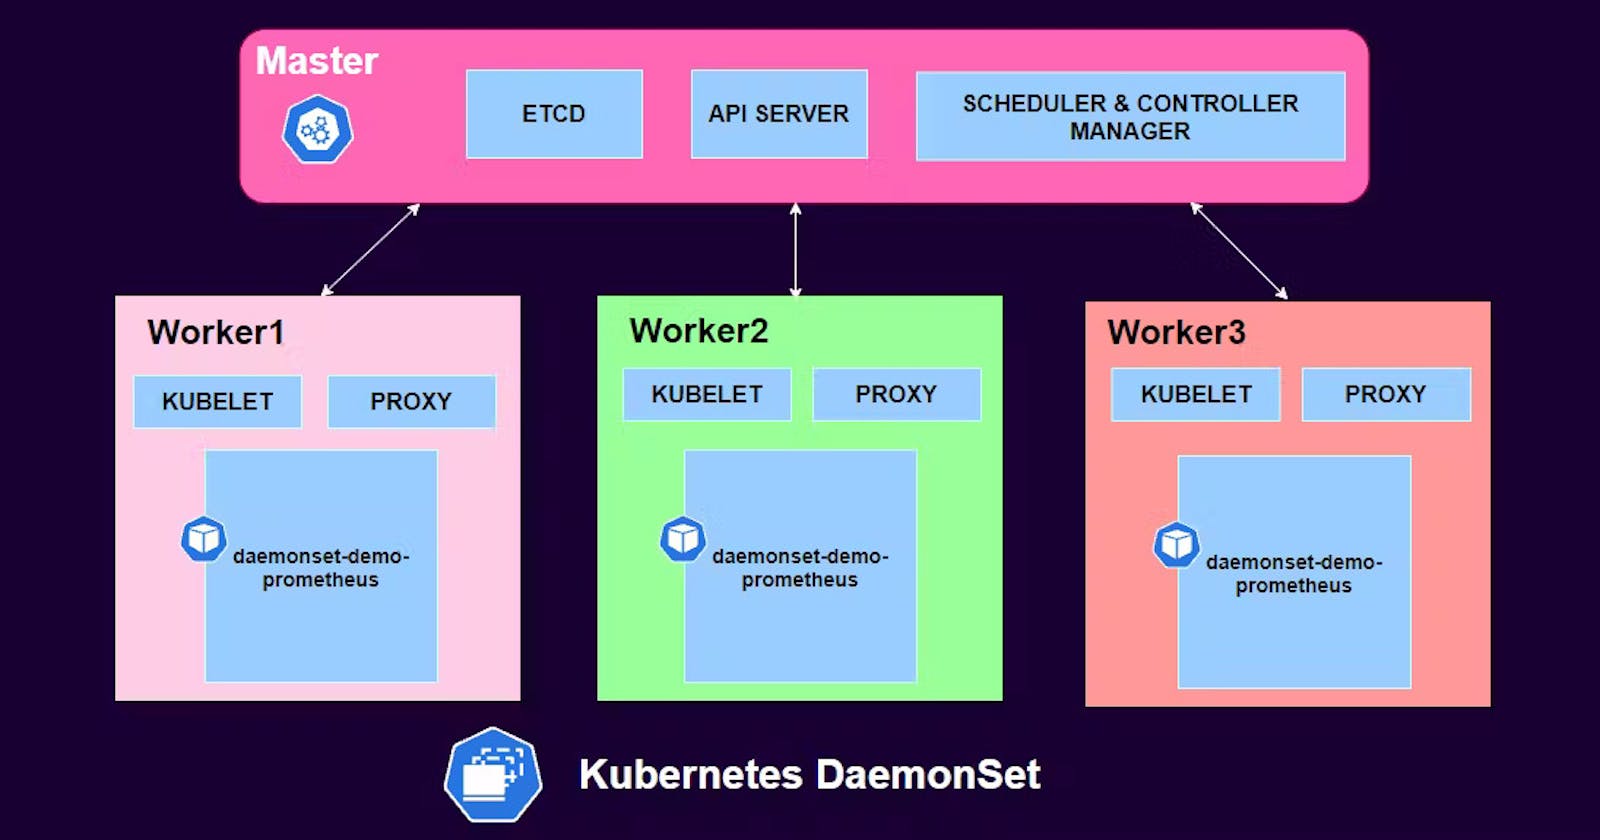 How to deploy DaemonSets Service in Kubernetes (K8s)?